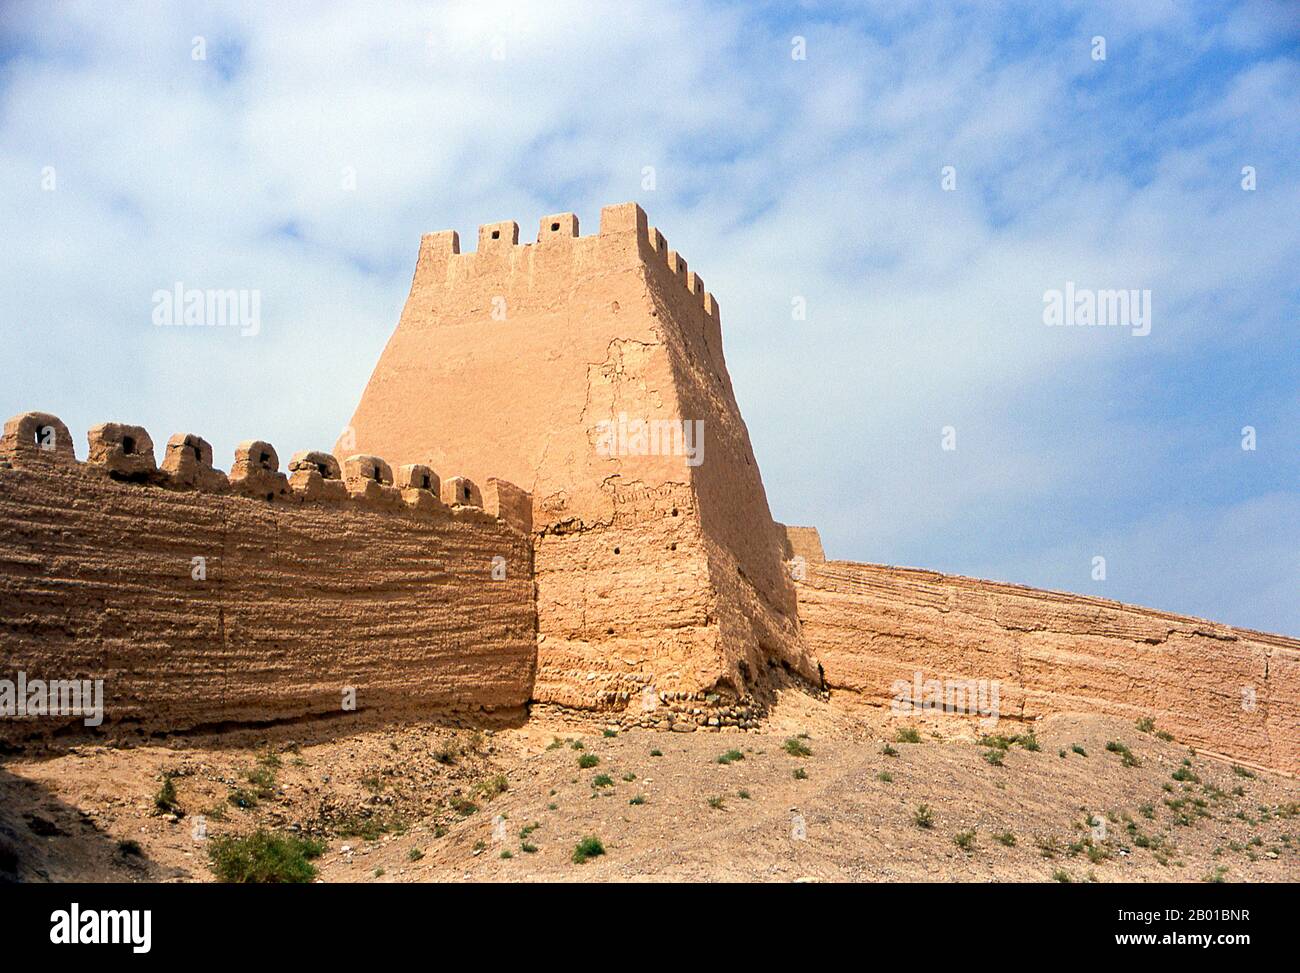 China: Outer wall tower next to the front gate, Jiayuguan Fort, Jiayuguan, Gansu.  Jiayuguan, the ‘First and Greatest Pass under Heaven’, was completed in 1372 on the orders of Zhu Yuanzhang, the first Ming Emperor (1368-98), to mark the end of the Ming Great Wall. It was also the very limits of Chinese civilisation, and the beginnings of the outer ‘barbarian’ lands.  For centuries the fort was not just of strategic importance to Han Chinese, but of cultural significance as well. This was the last civilised place before the outer darkness, and those proceeding beyond faced a life of exile. Stock Photo